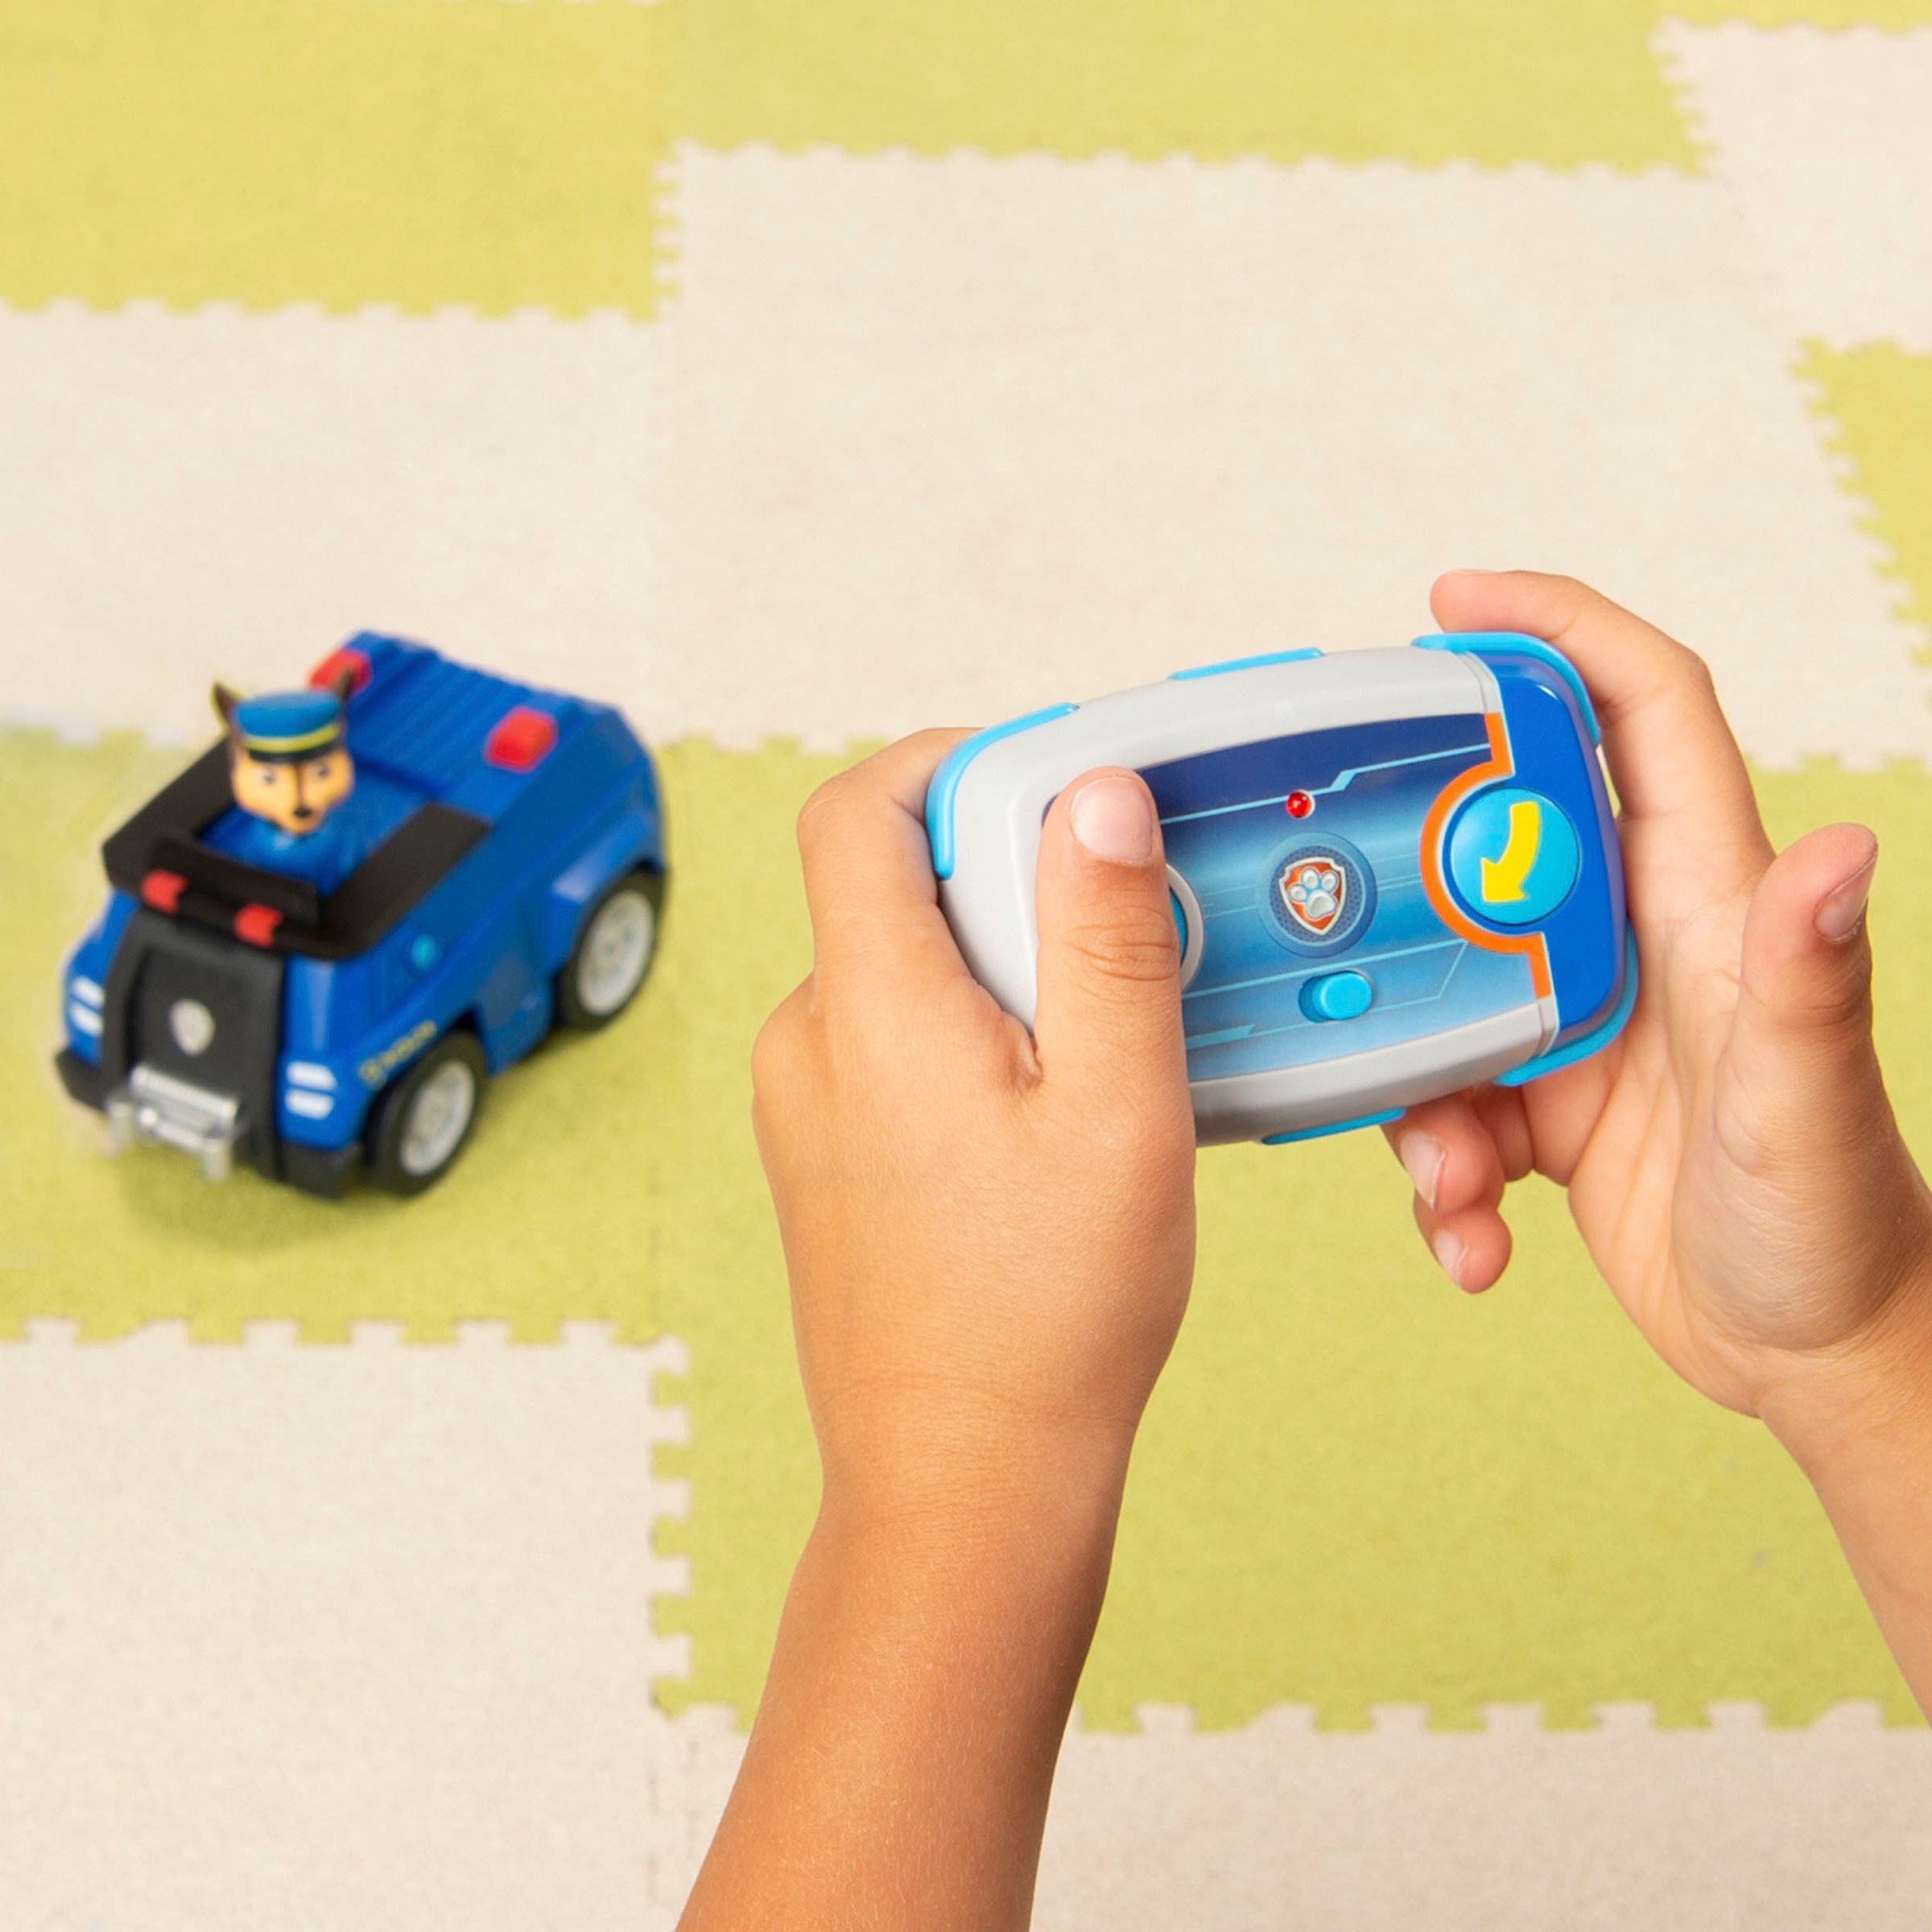 Spin Master RC-Auto »Paw Patrol - RC Chase«, inklusive Fernbedienung